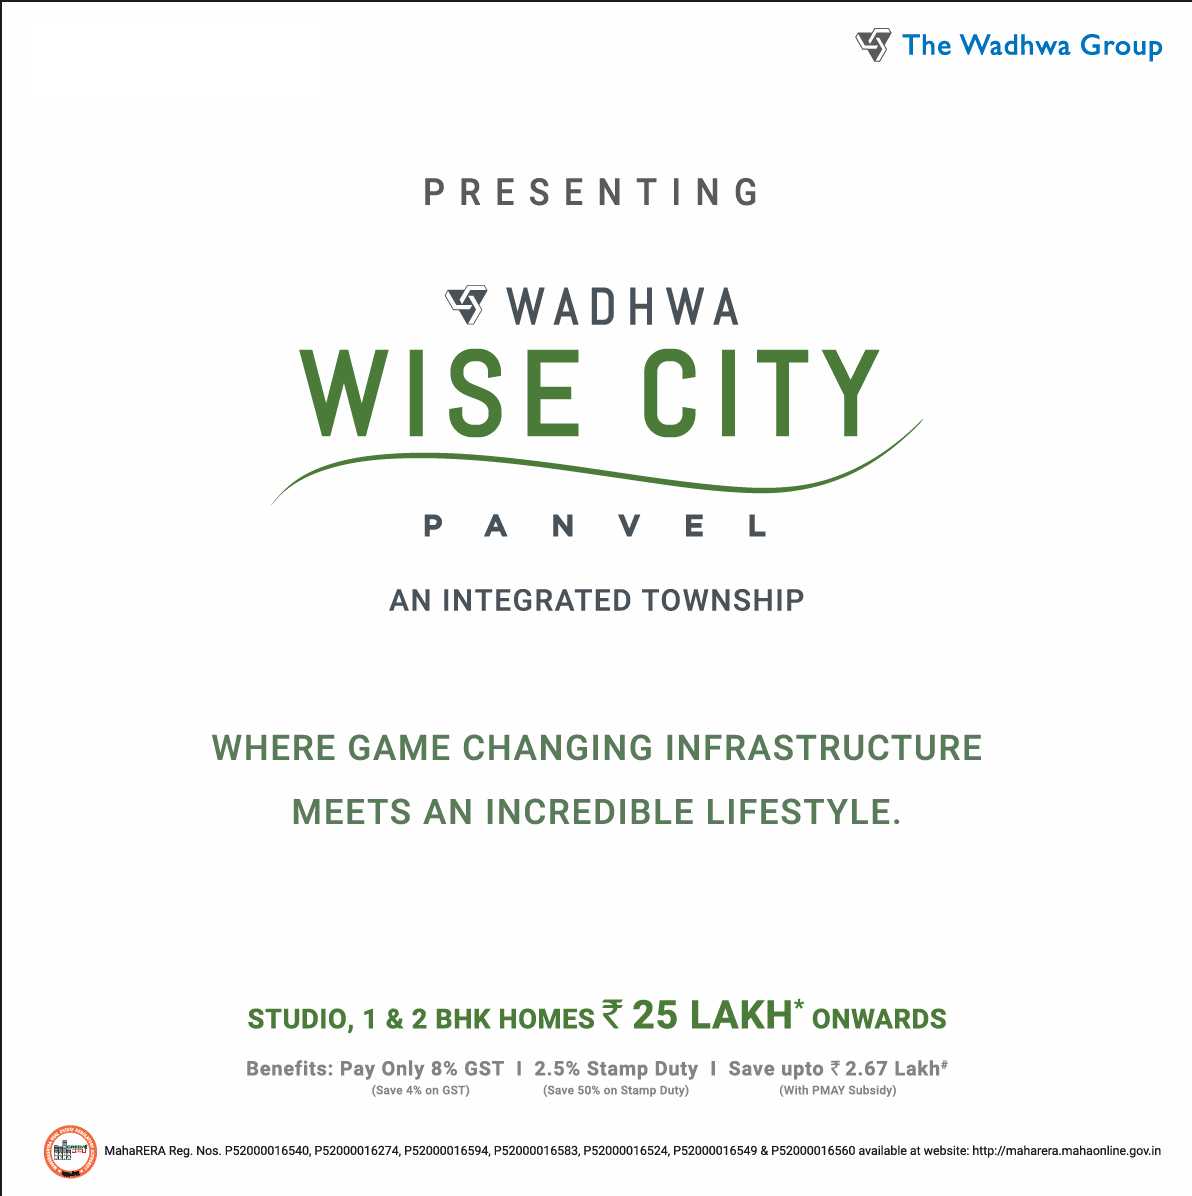 Save up to Rs. 2.67 Lakh by booking your home at Wadhwa Wise City in Navi Mumbai Update